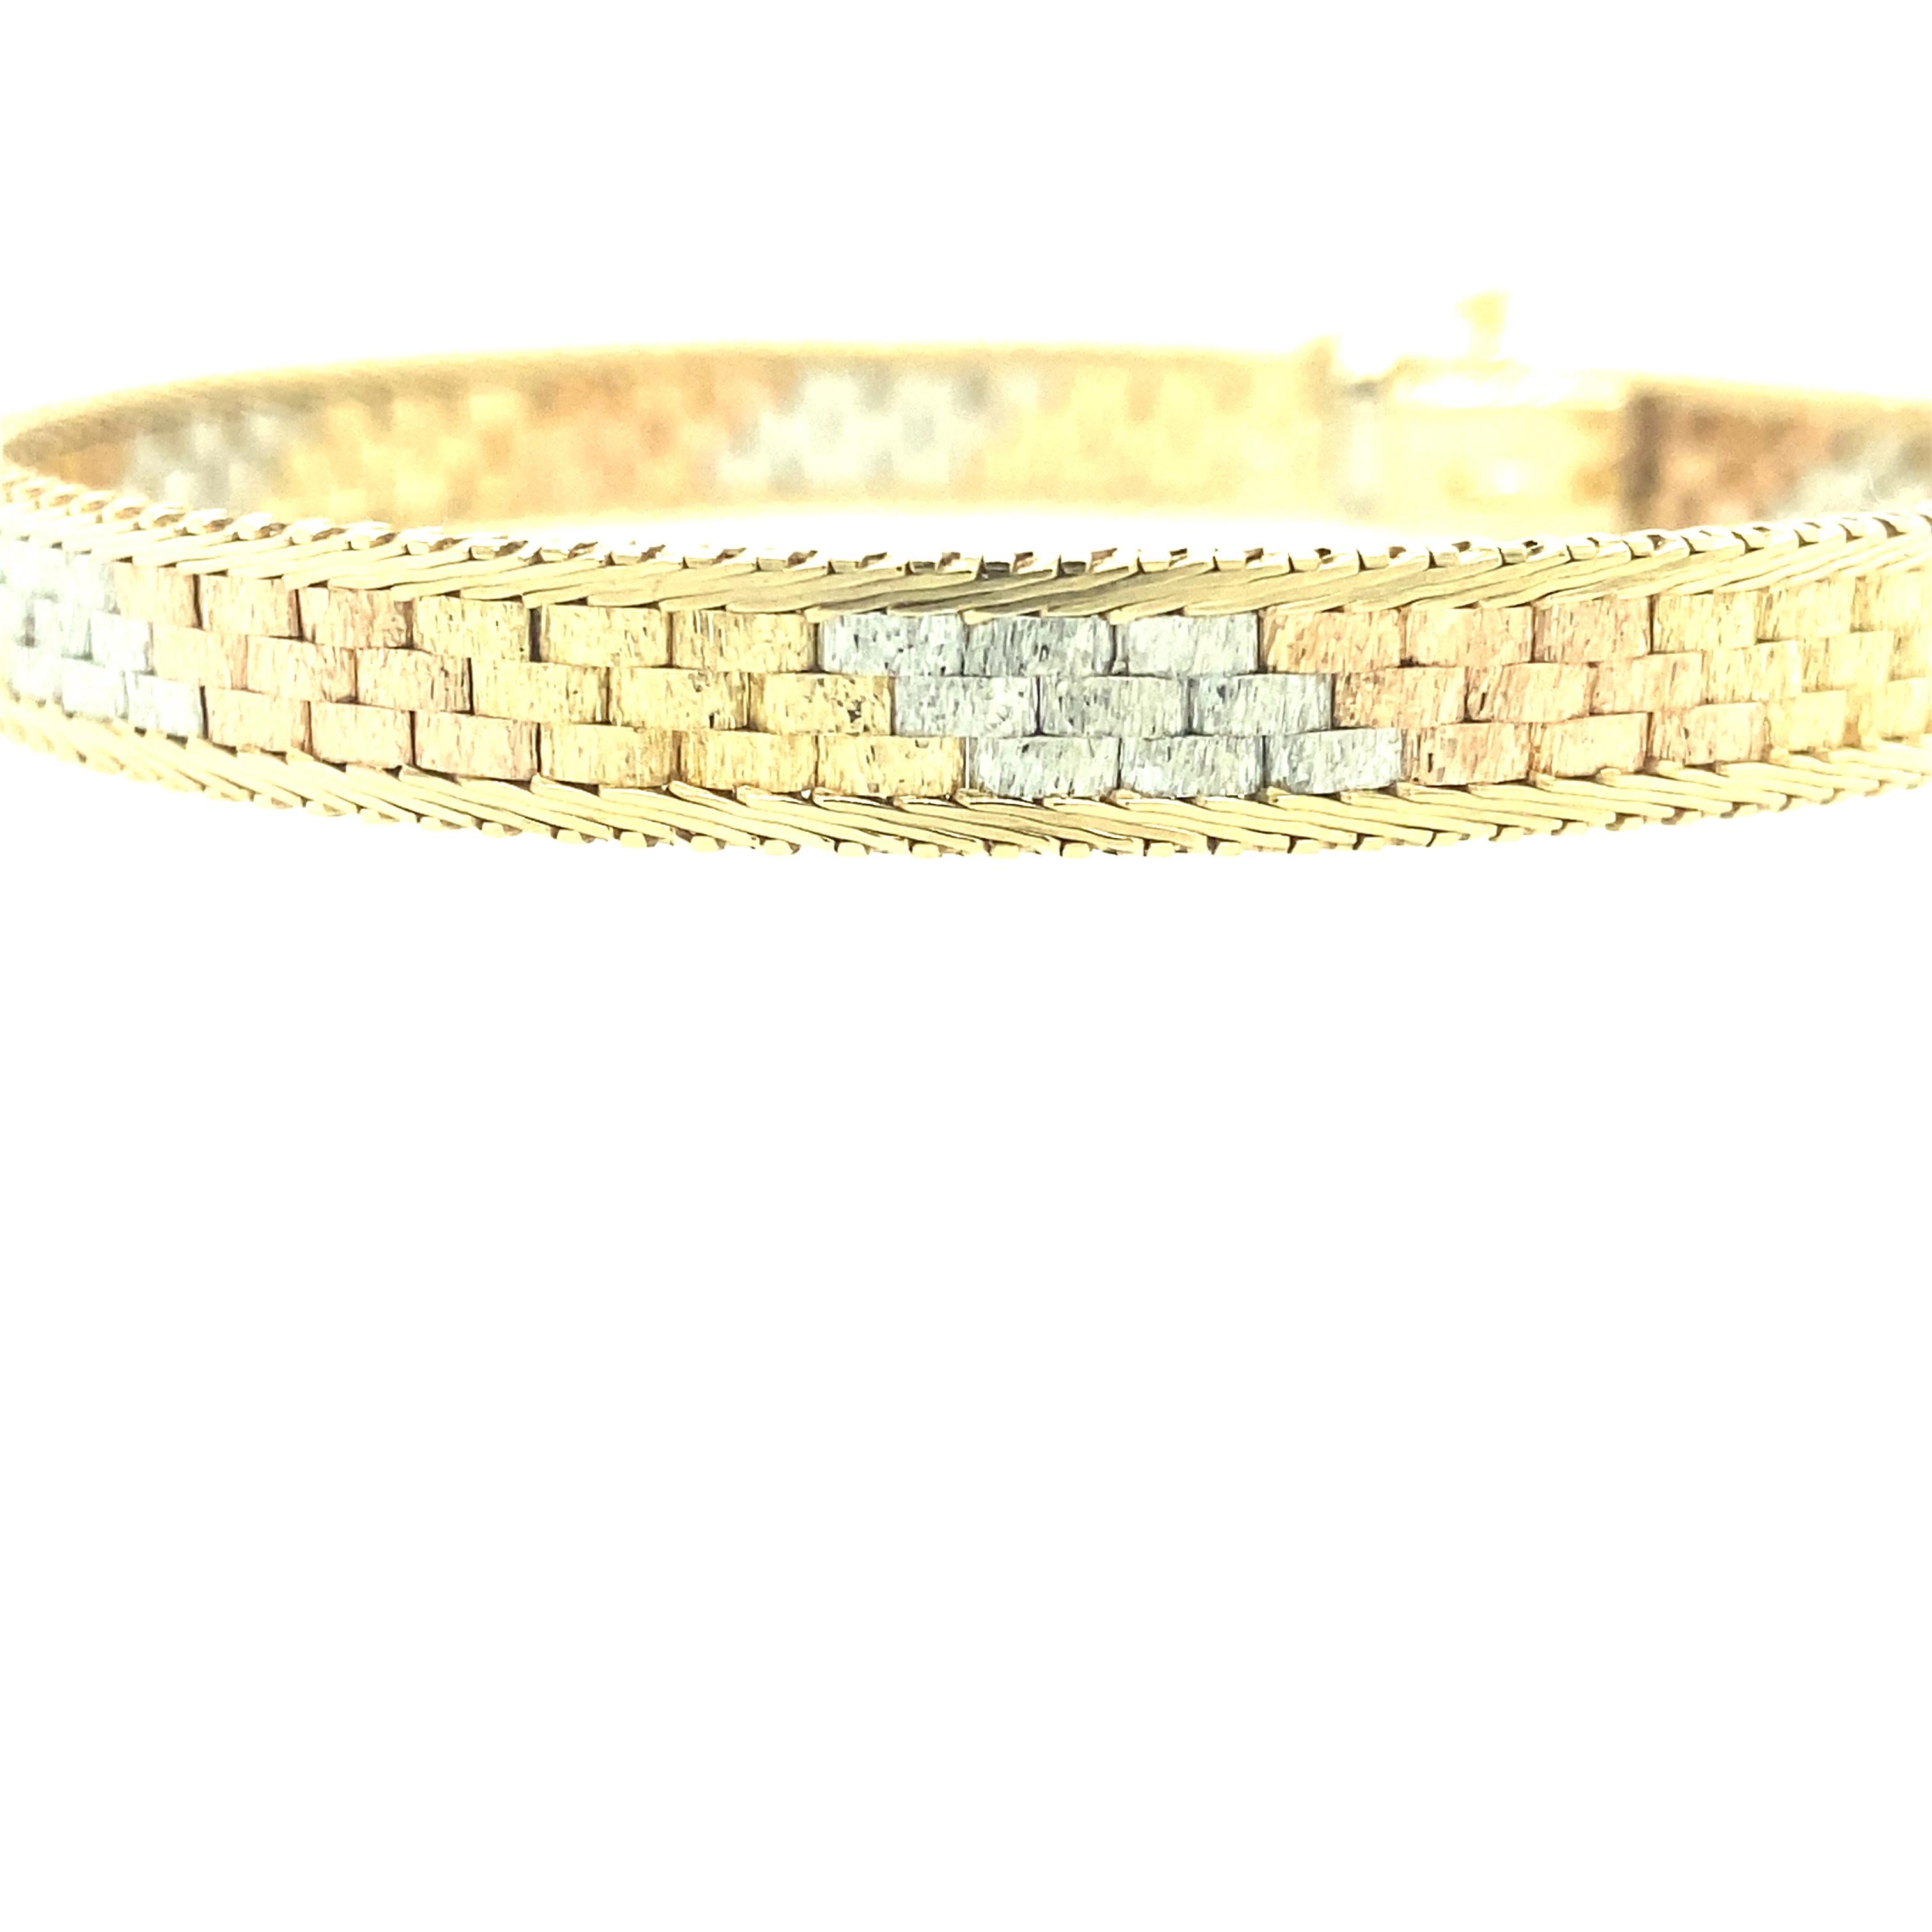 One 14 karat yellow, white and rose gold (stamped 14K ITALY NRK) mesh bracelet measuring 7 inches long complete with a box clasp and safety closure.